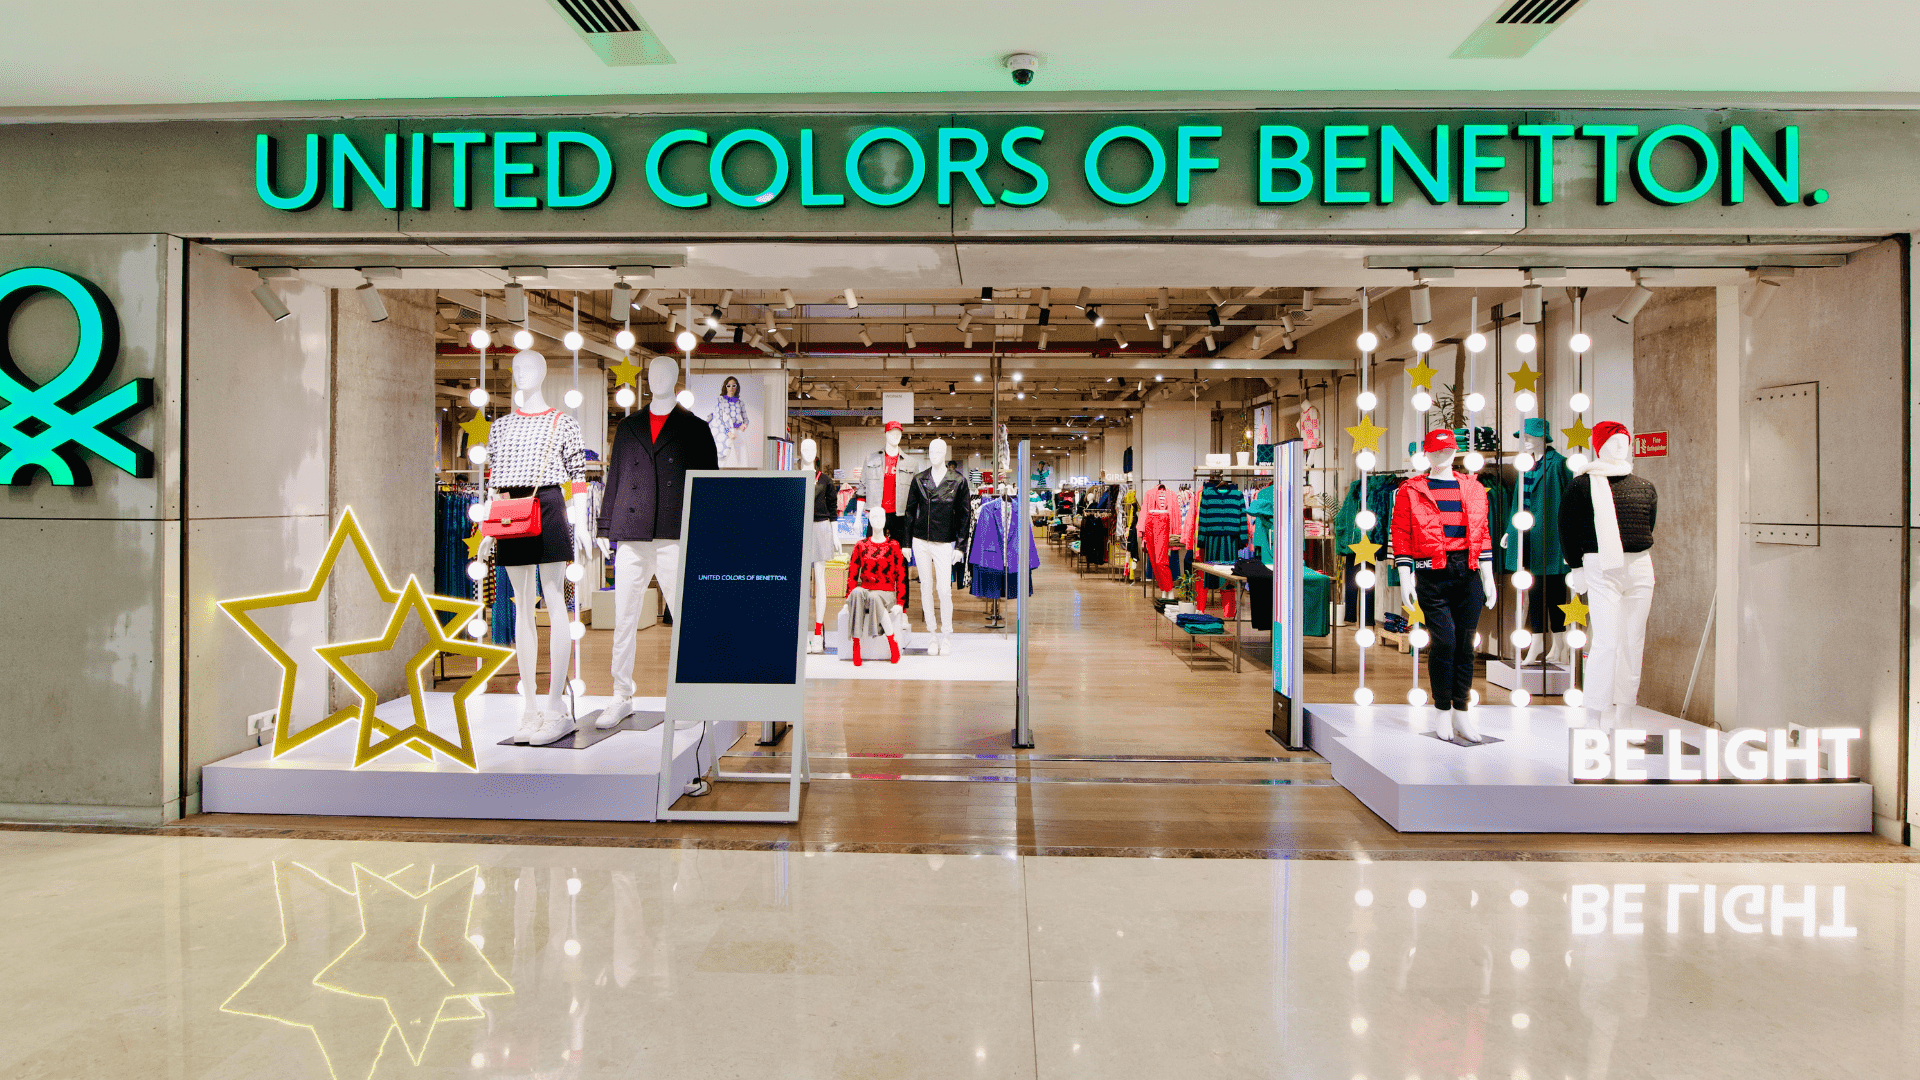 https://www.dlfmallofindia.com/Assets/stores/united-colors-of-benetton.png